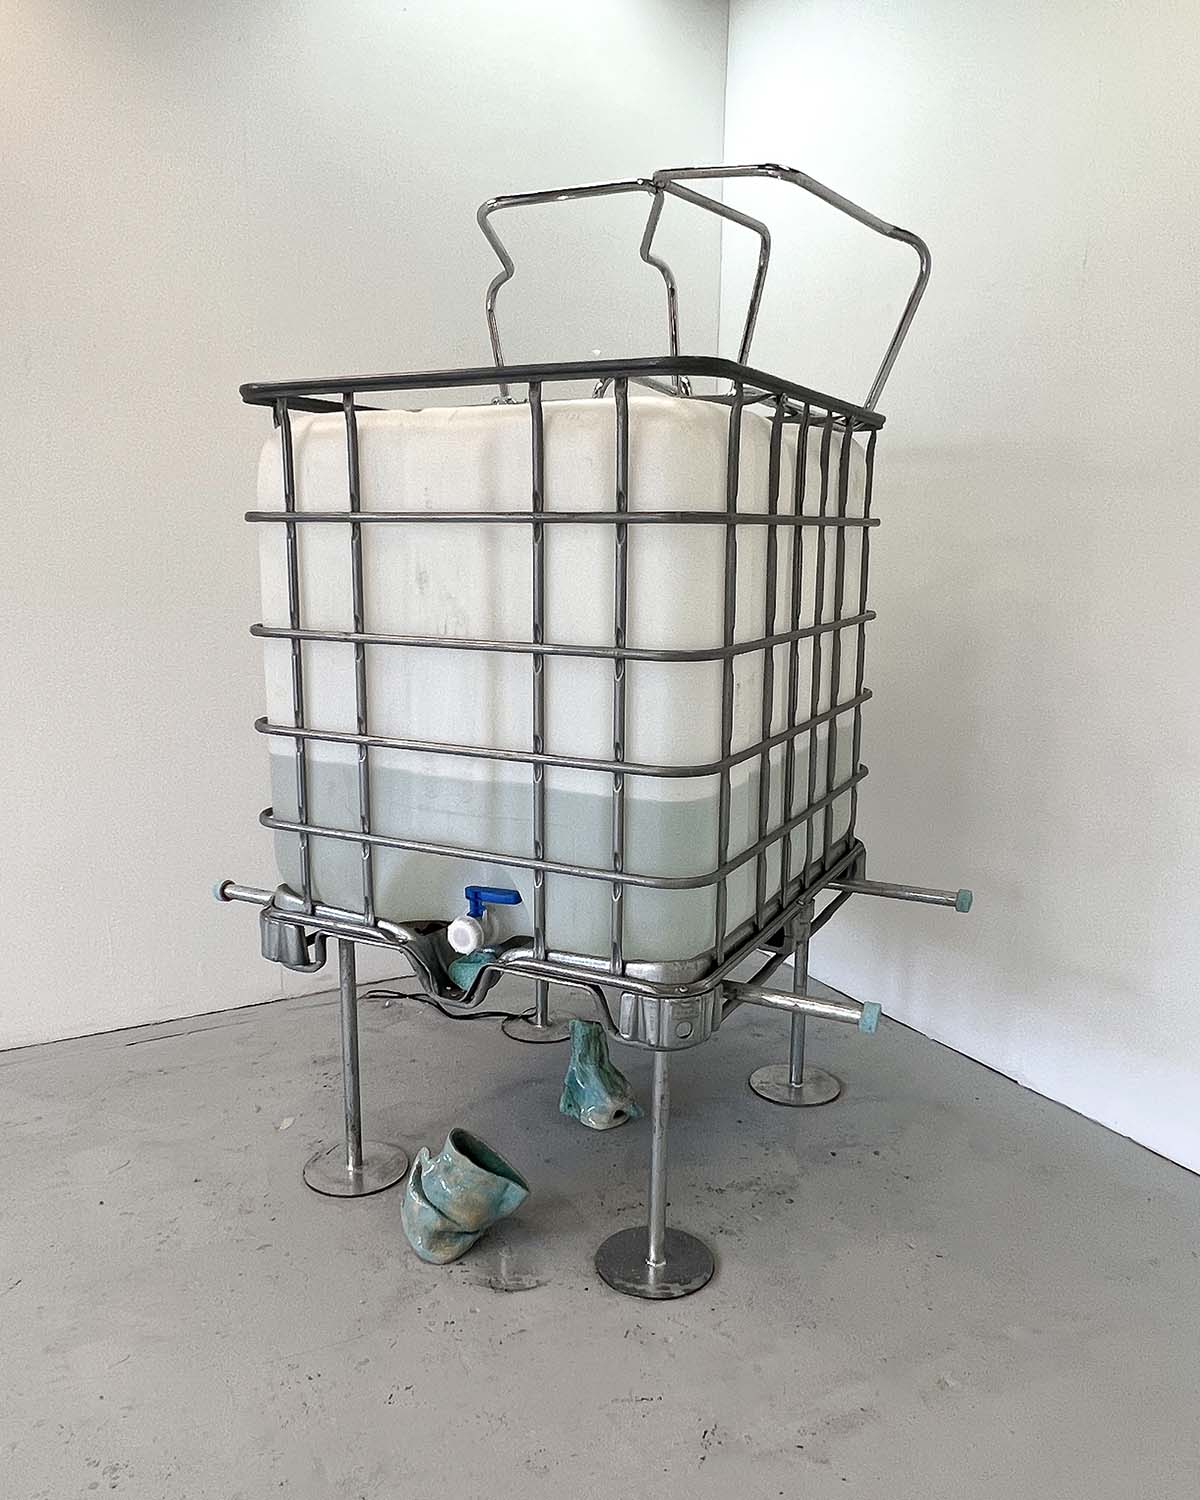 An image of a large plastic water container in a steel cage, standing on steel legs.